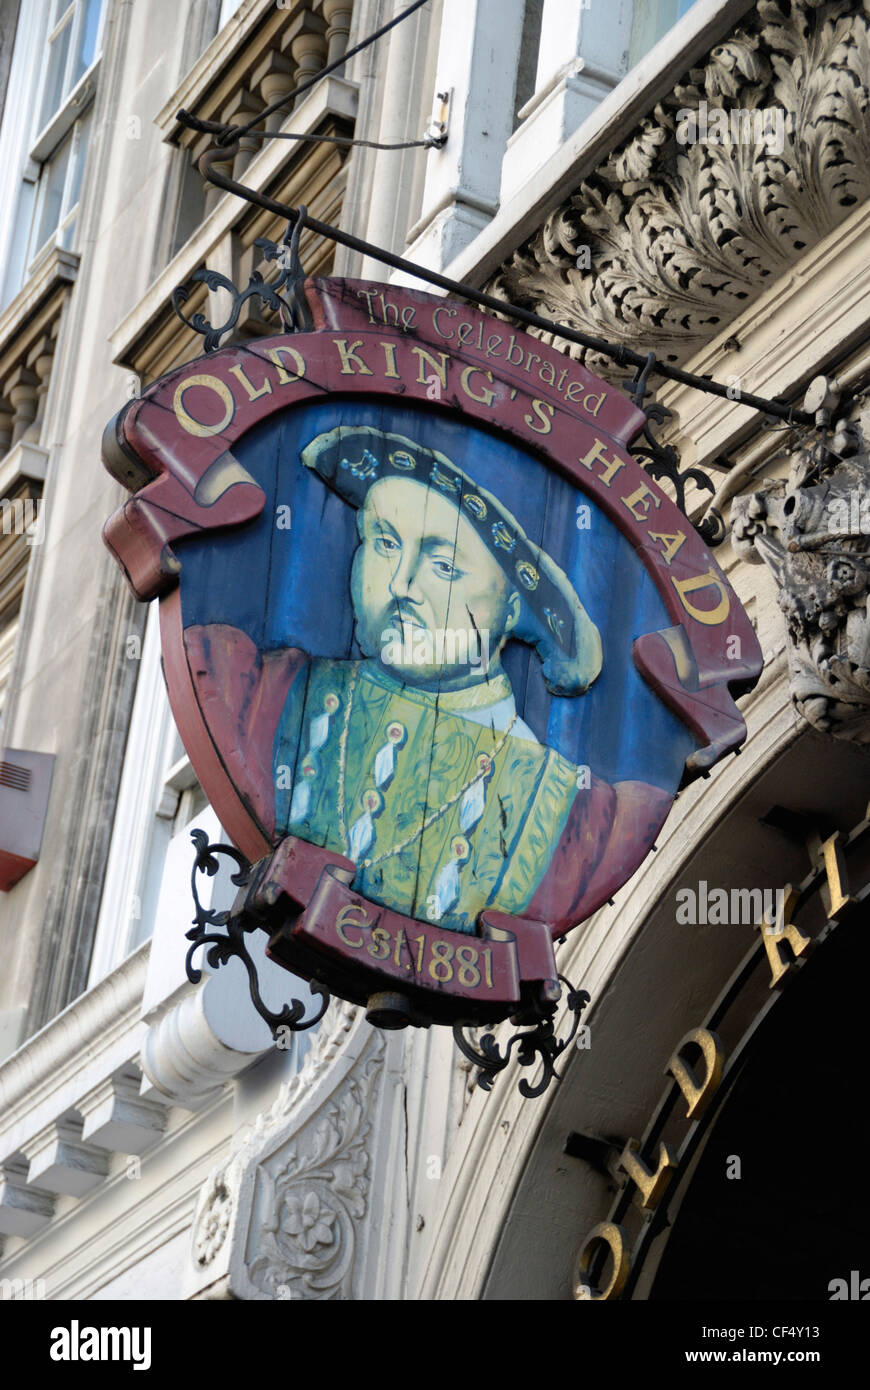 The Old King's Head sign hanging outside the pub in Borough High Street. Stock Photo